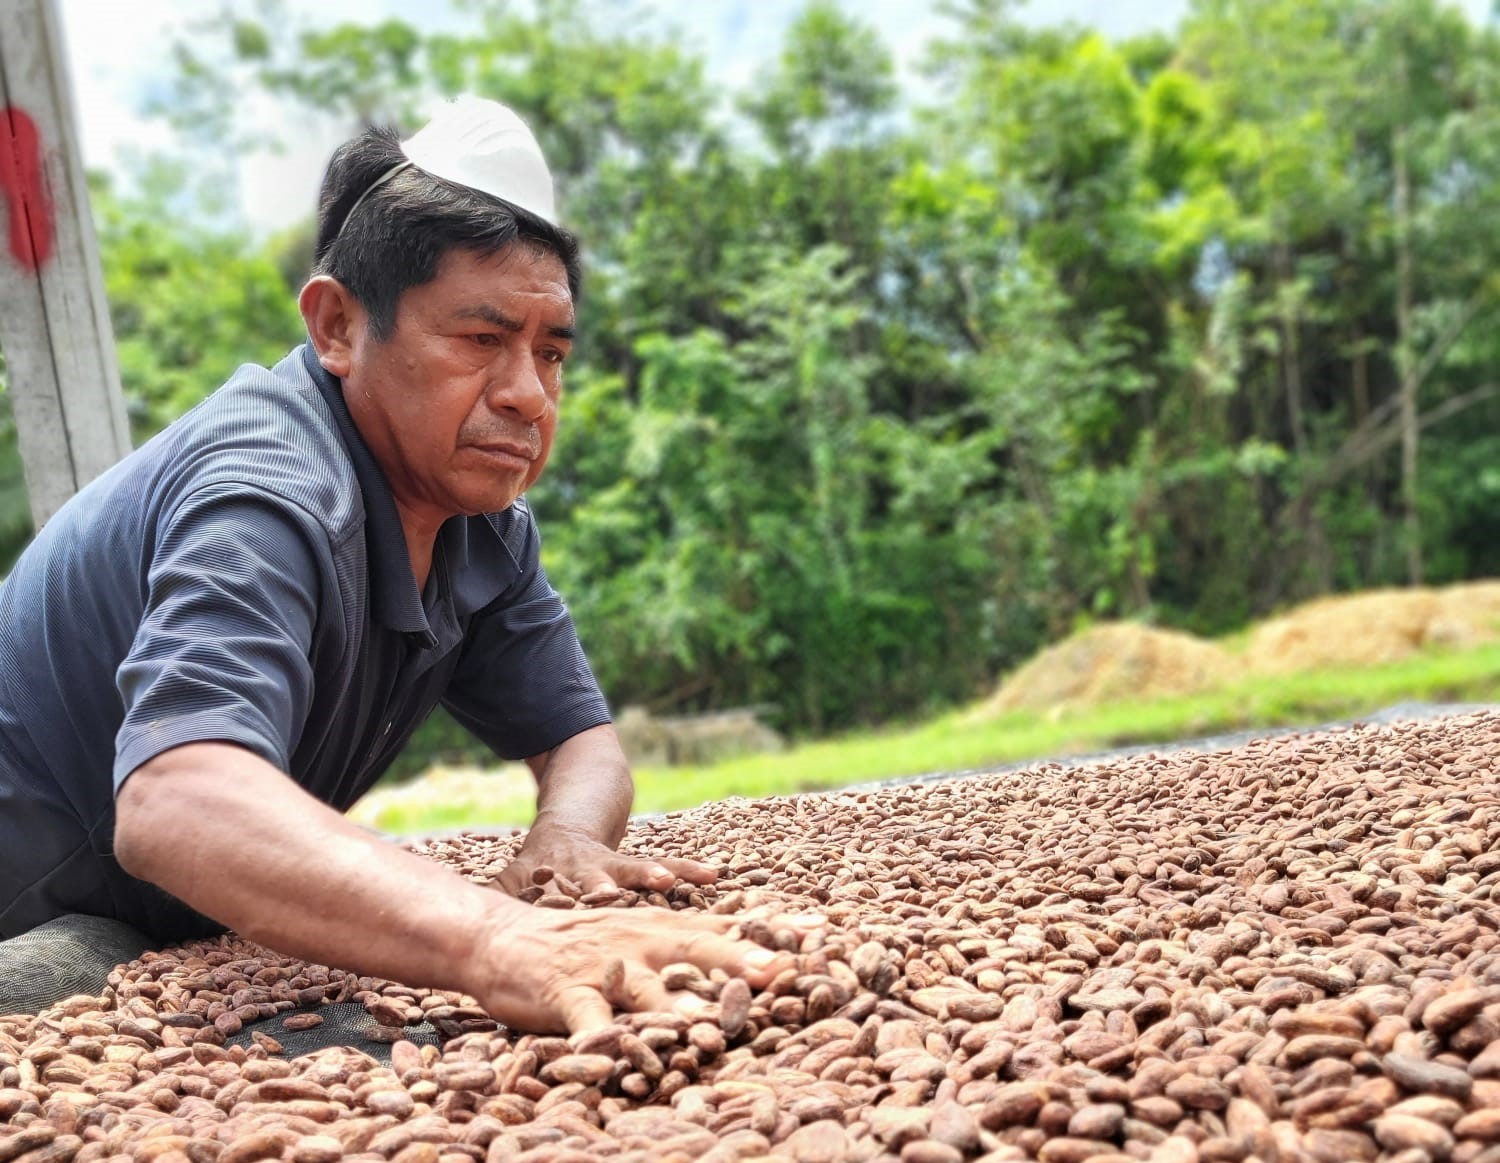 Belize’s cacao industry to expand exports and improve livelihoods through Standby Facility project 